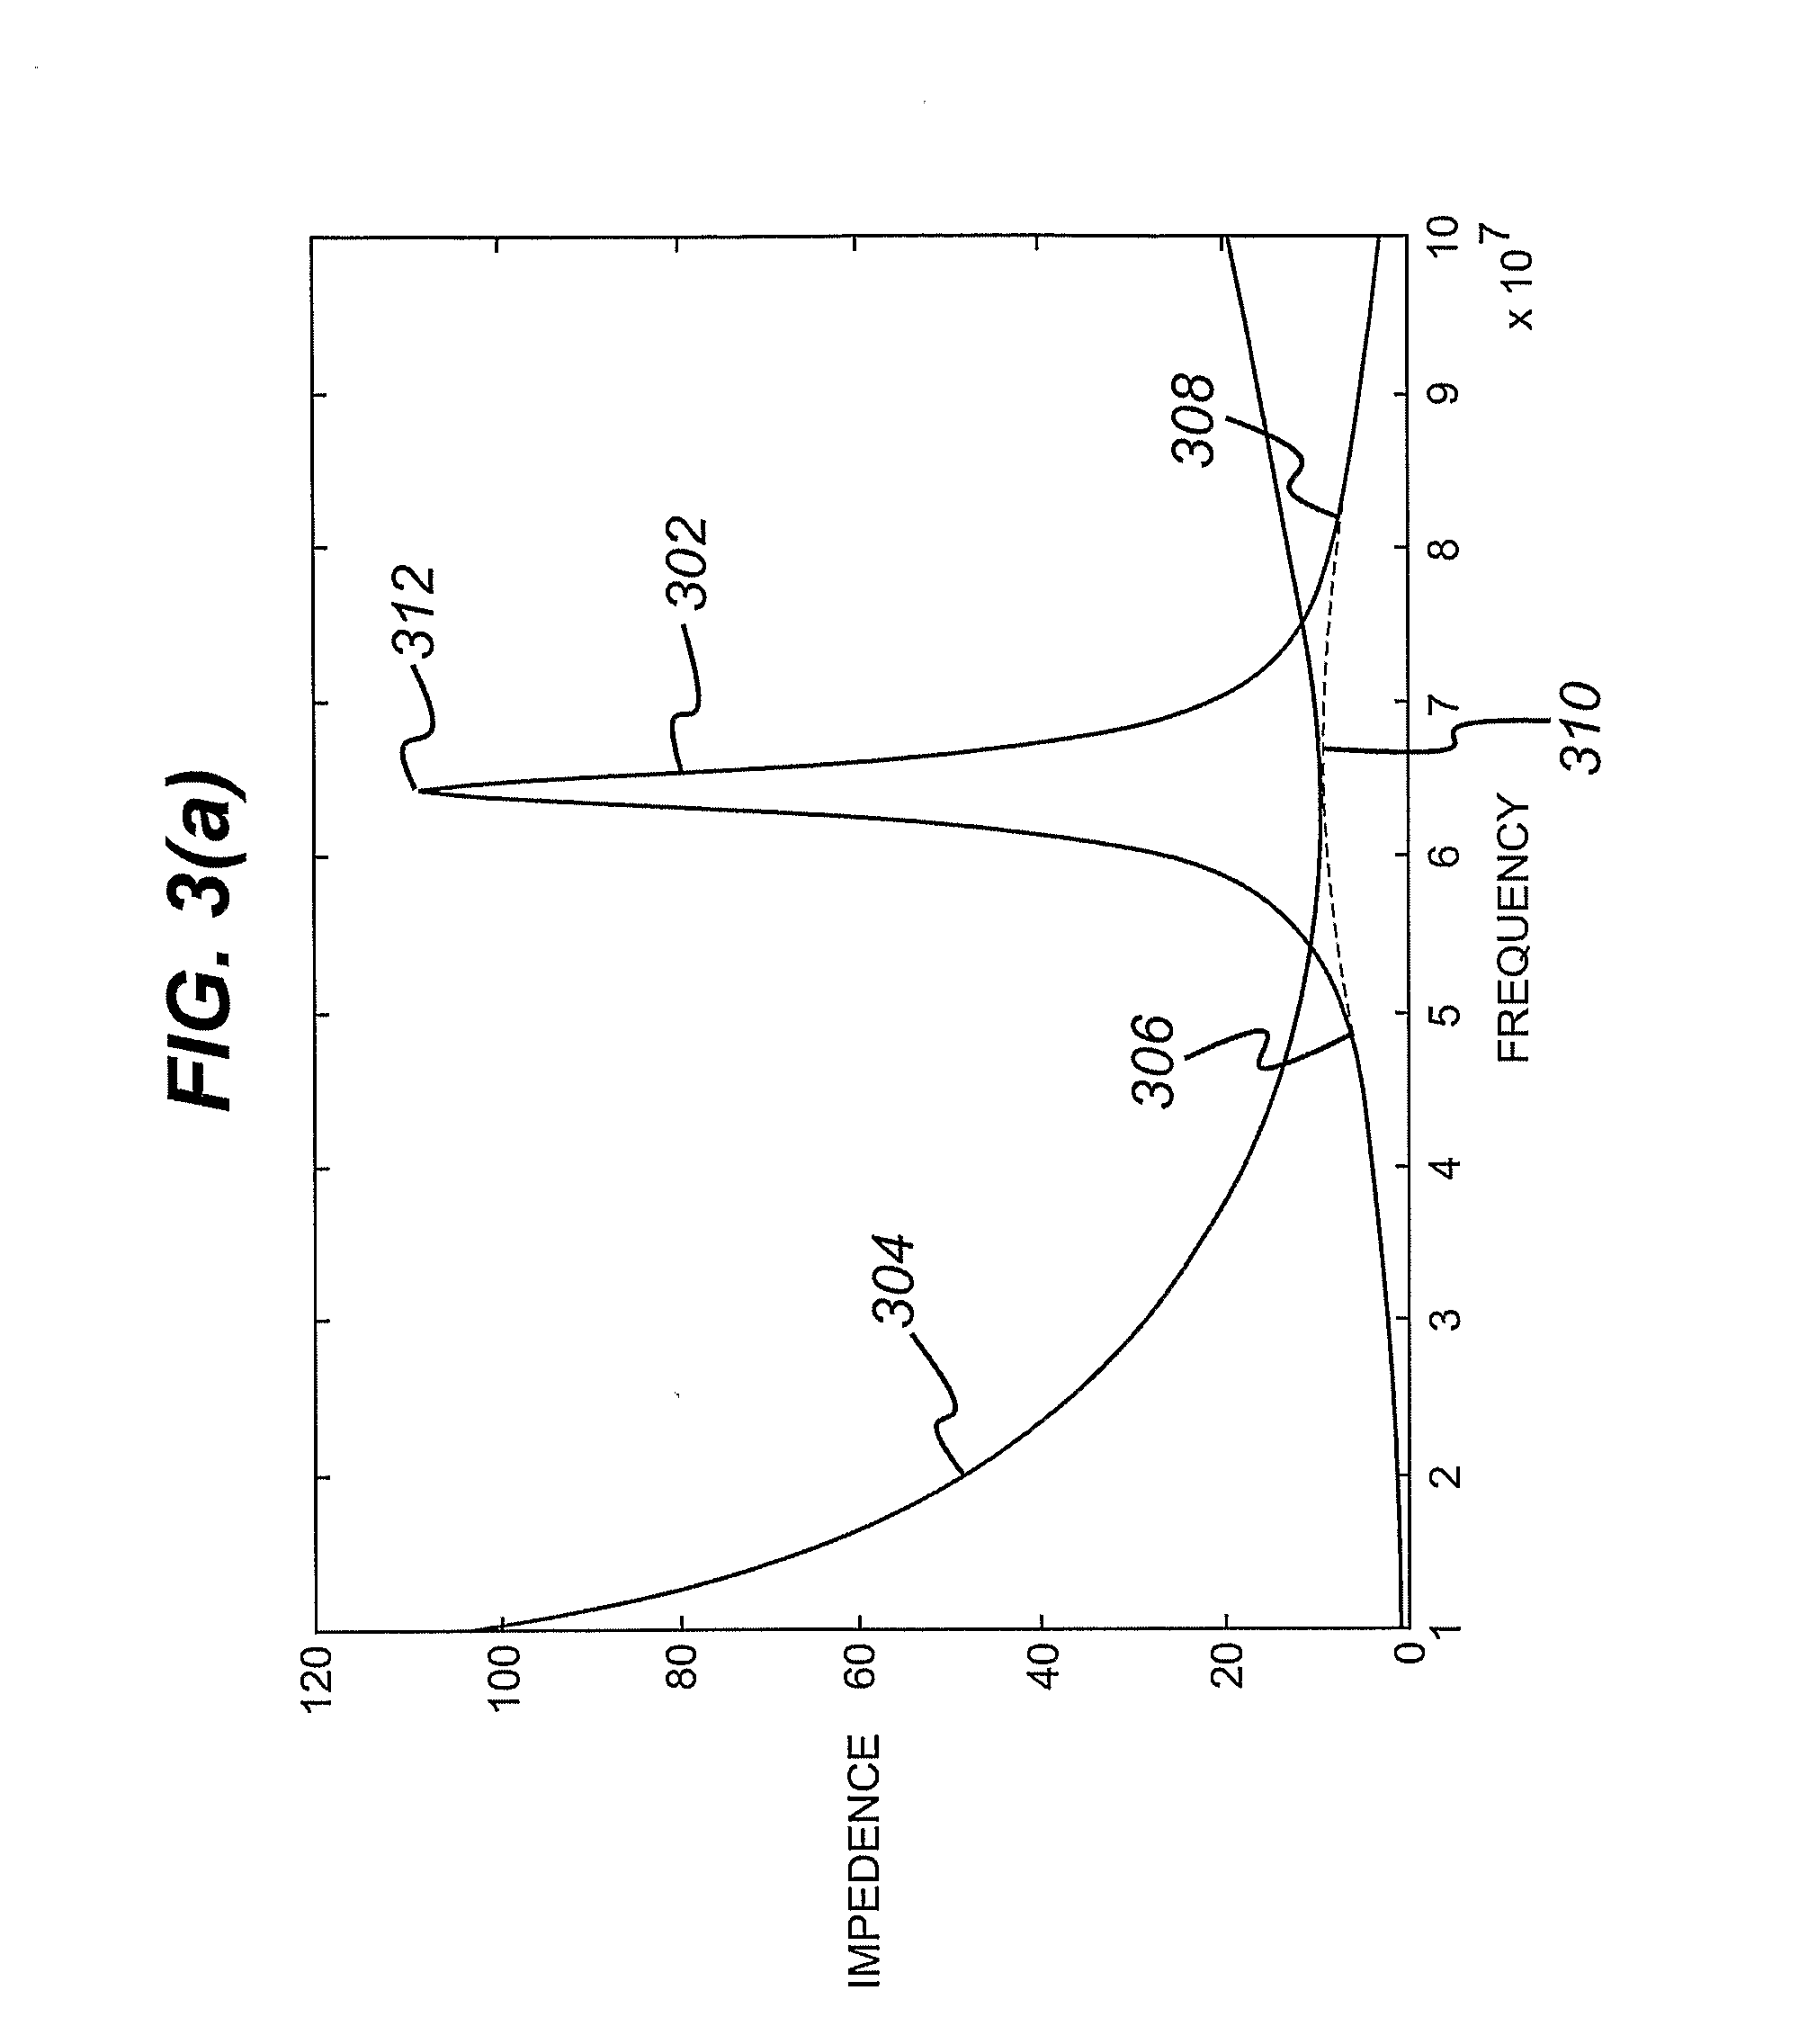 Power Amplifier with Stabilising Network